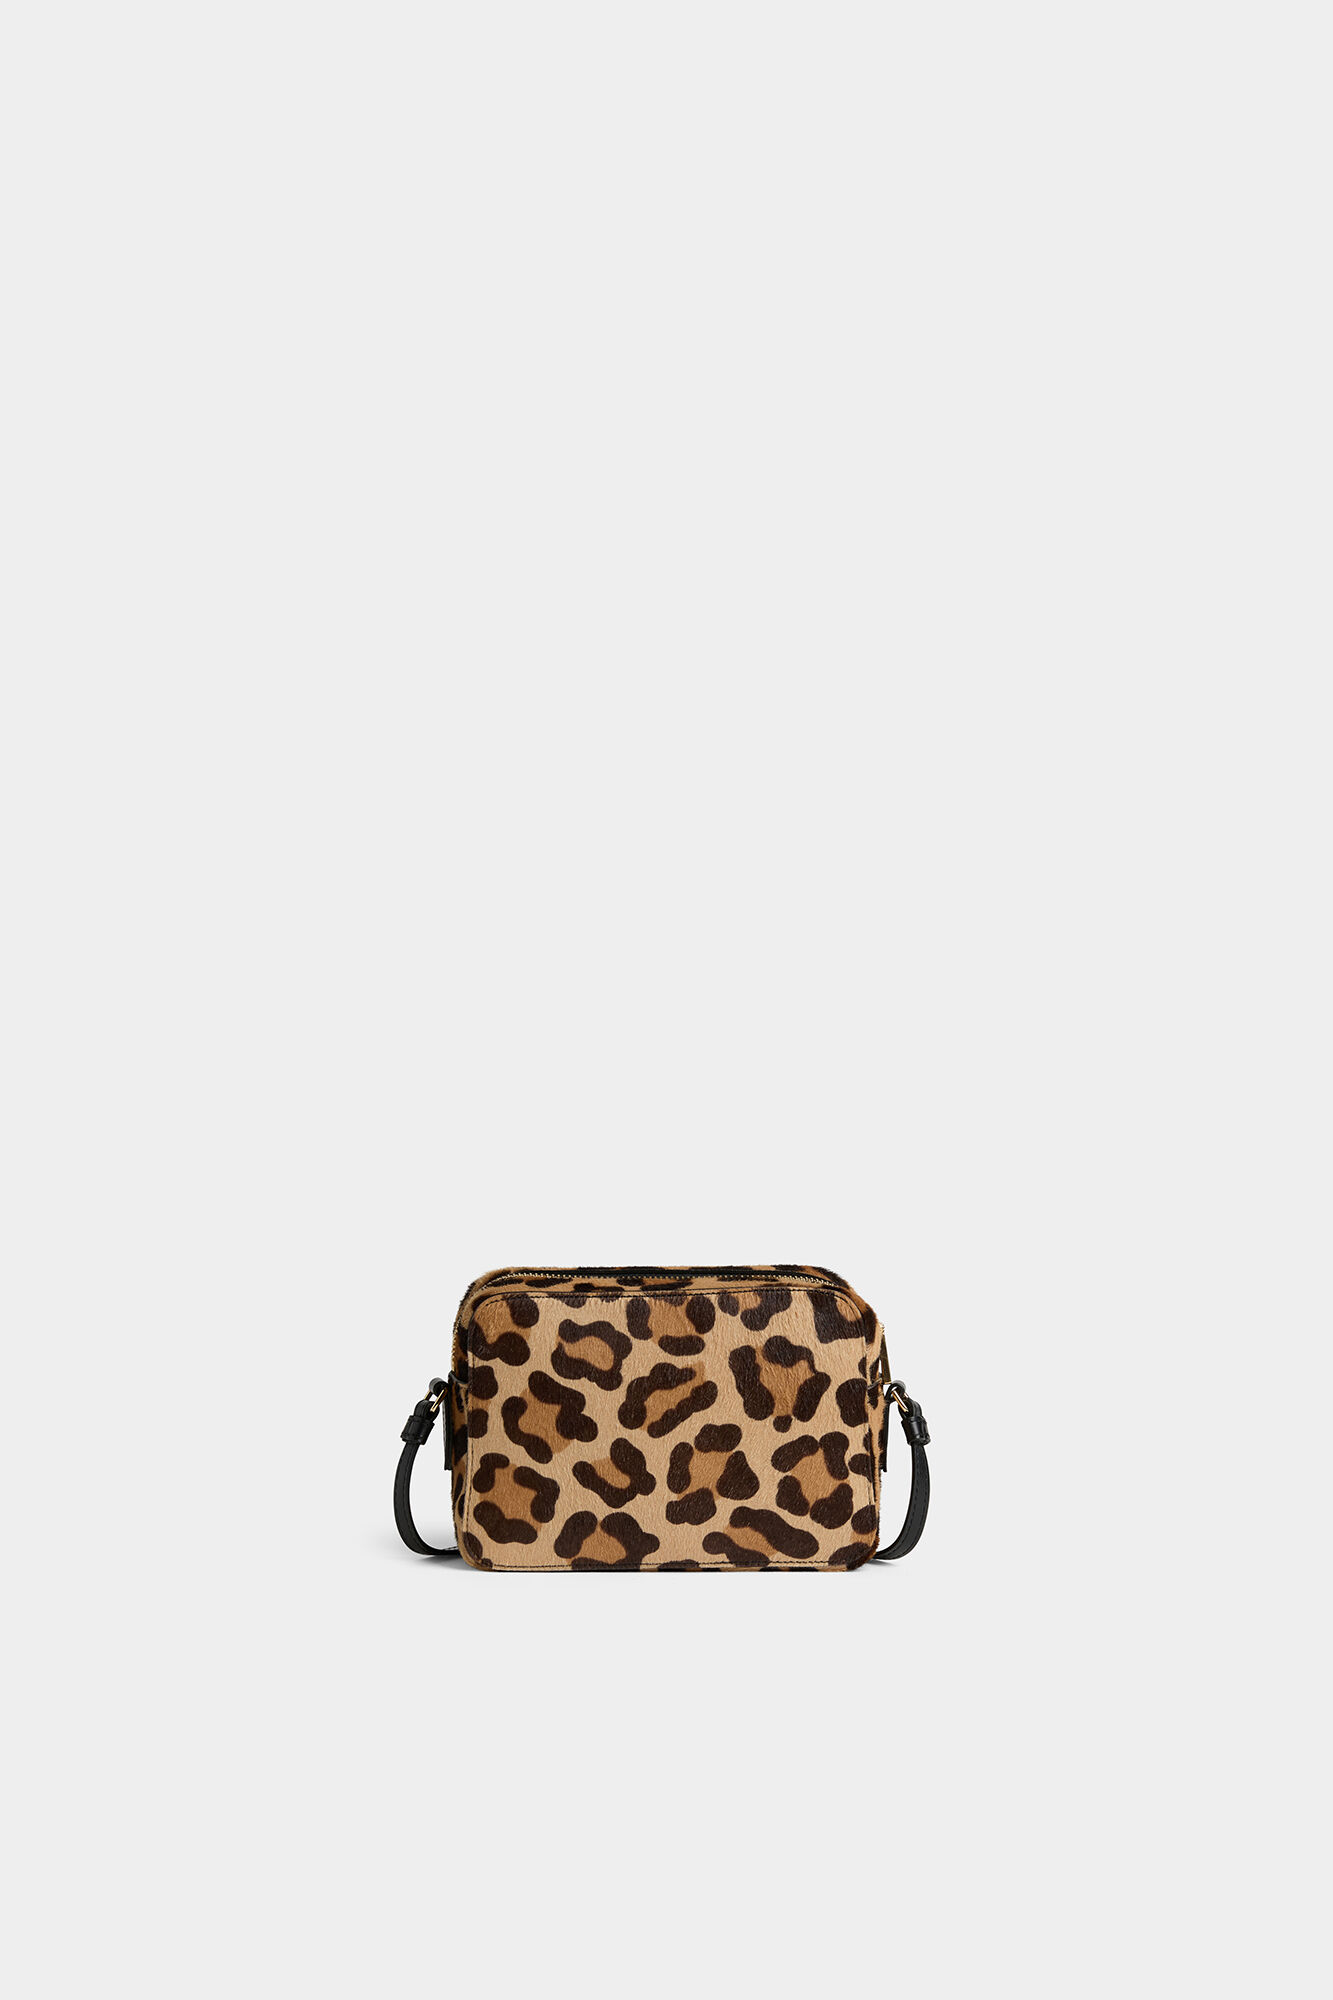 Kate Spade New York Spencer Leopard Printed Pvc Ns Phone Crossbody Bag |  Crossbody Bags | Clothing & Accessories | Shop The Exchange